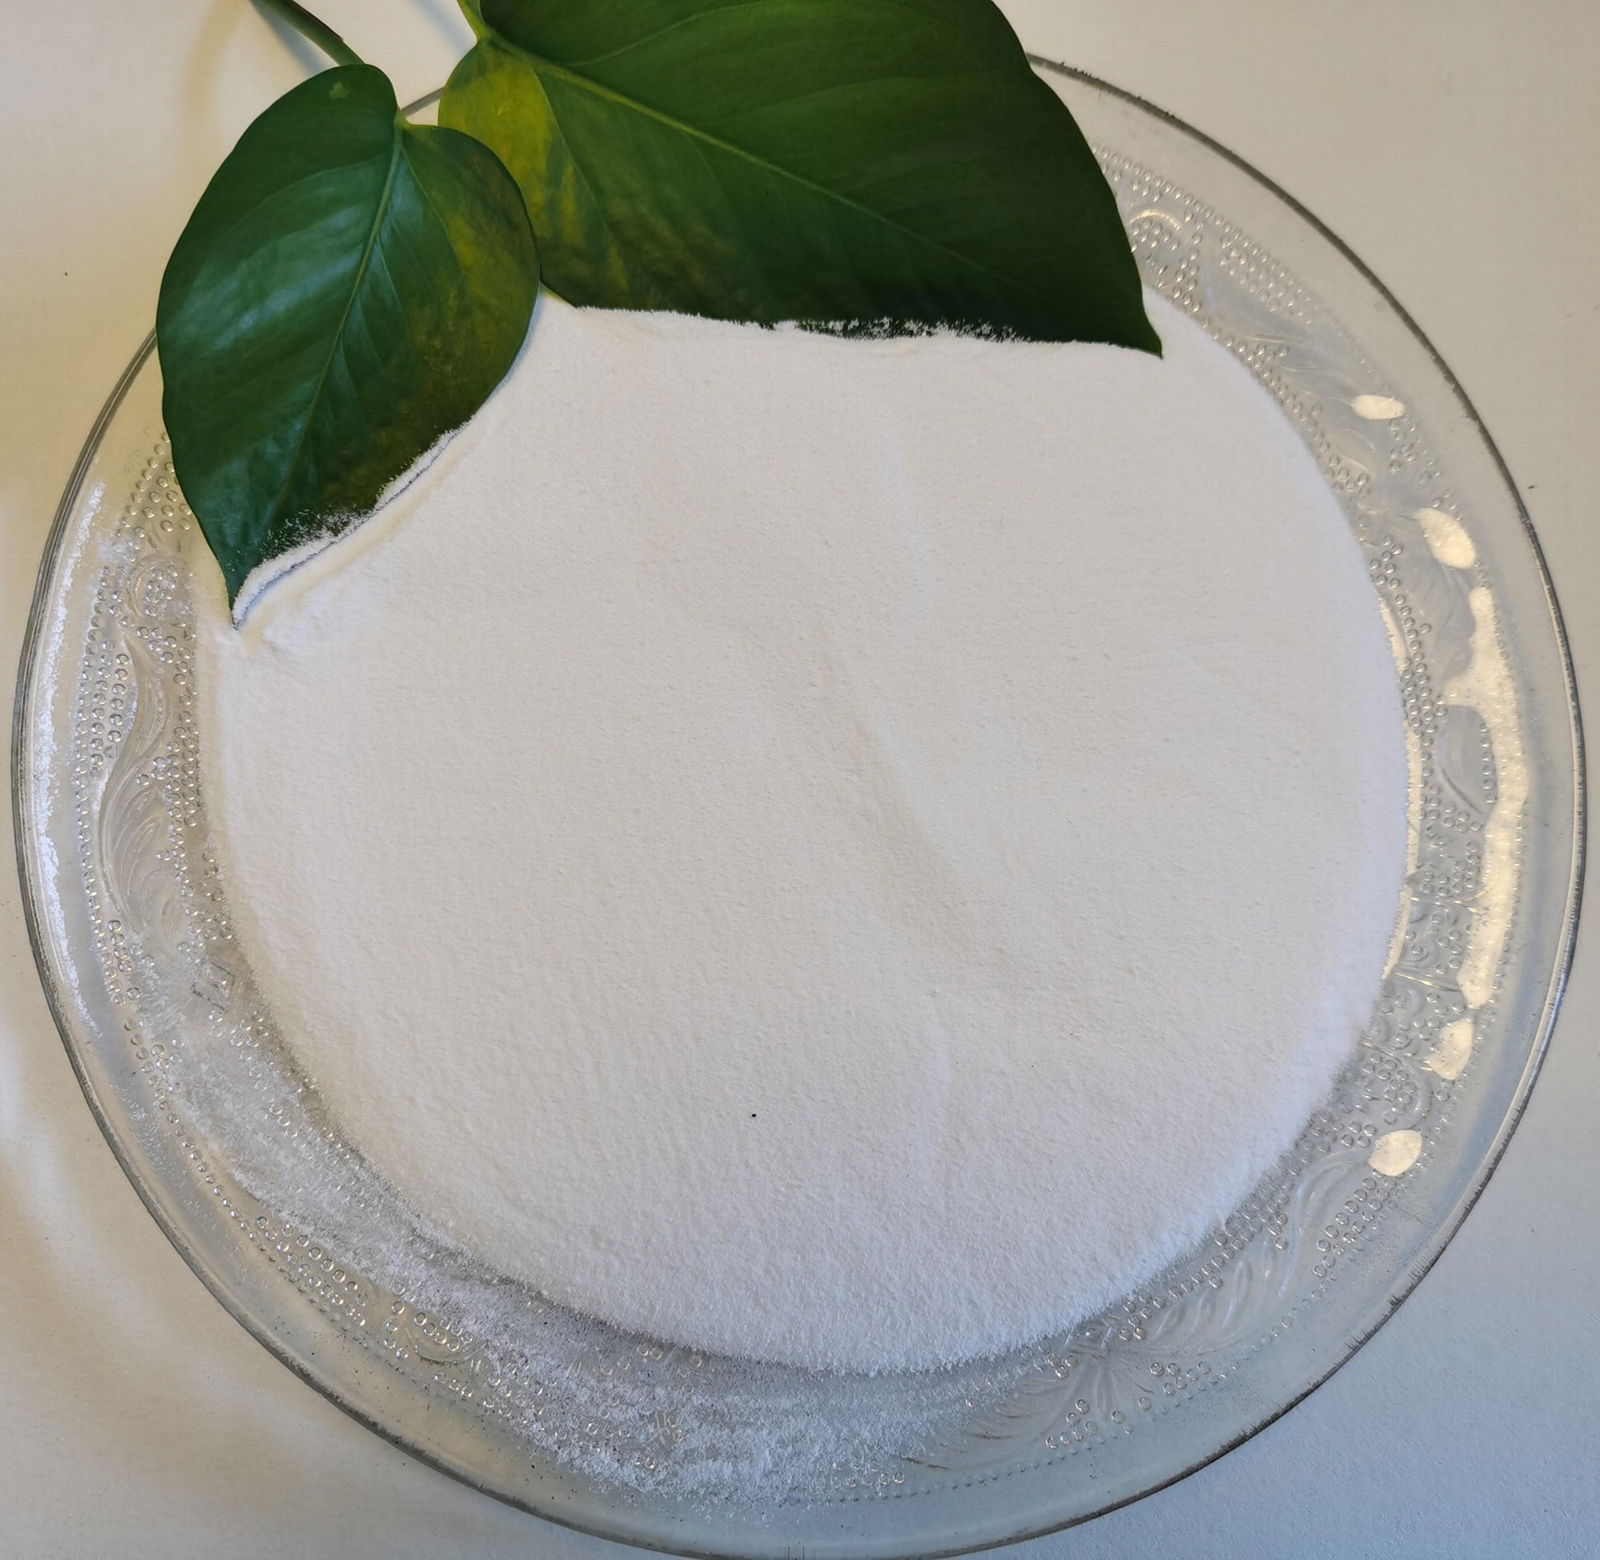  Agricultural Potassium Nitrate Organic compound fertilizer 100% soluble in wate